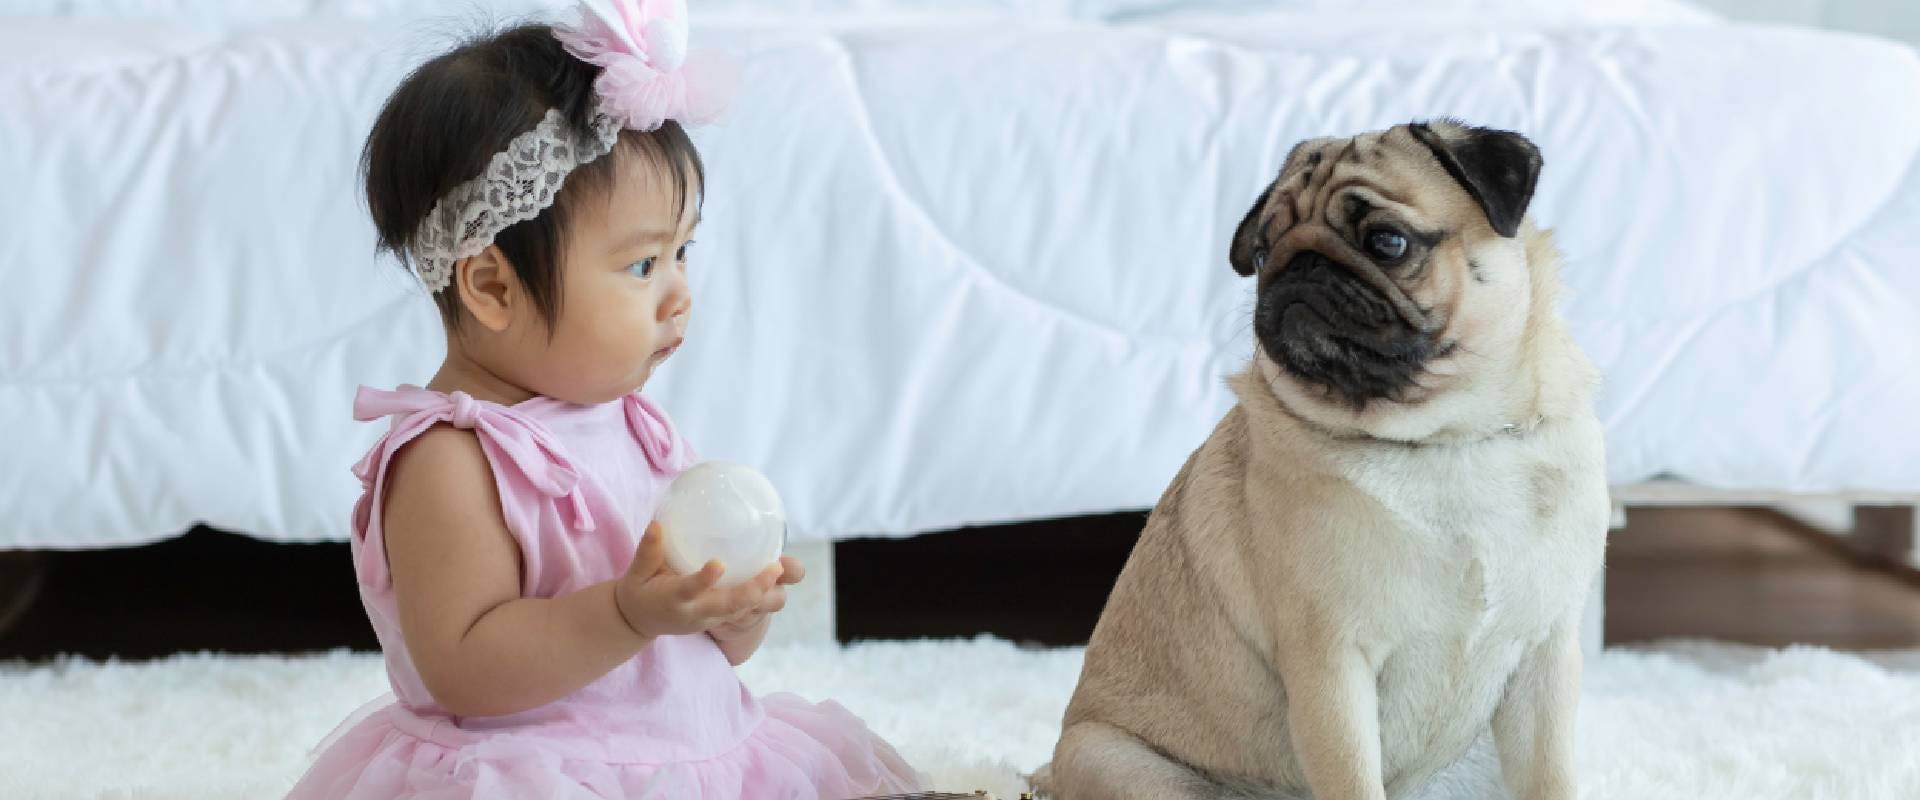 Baby sitting with a Pug